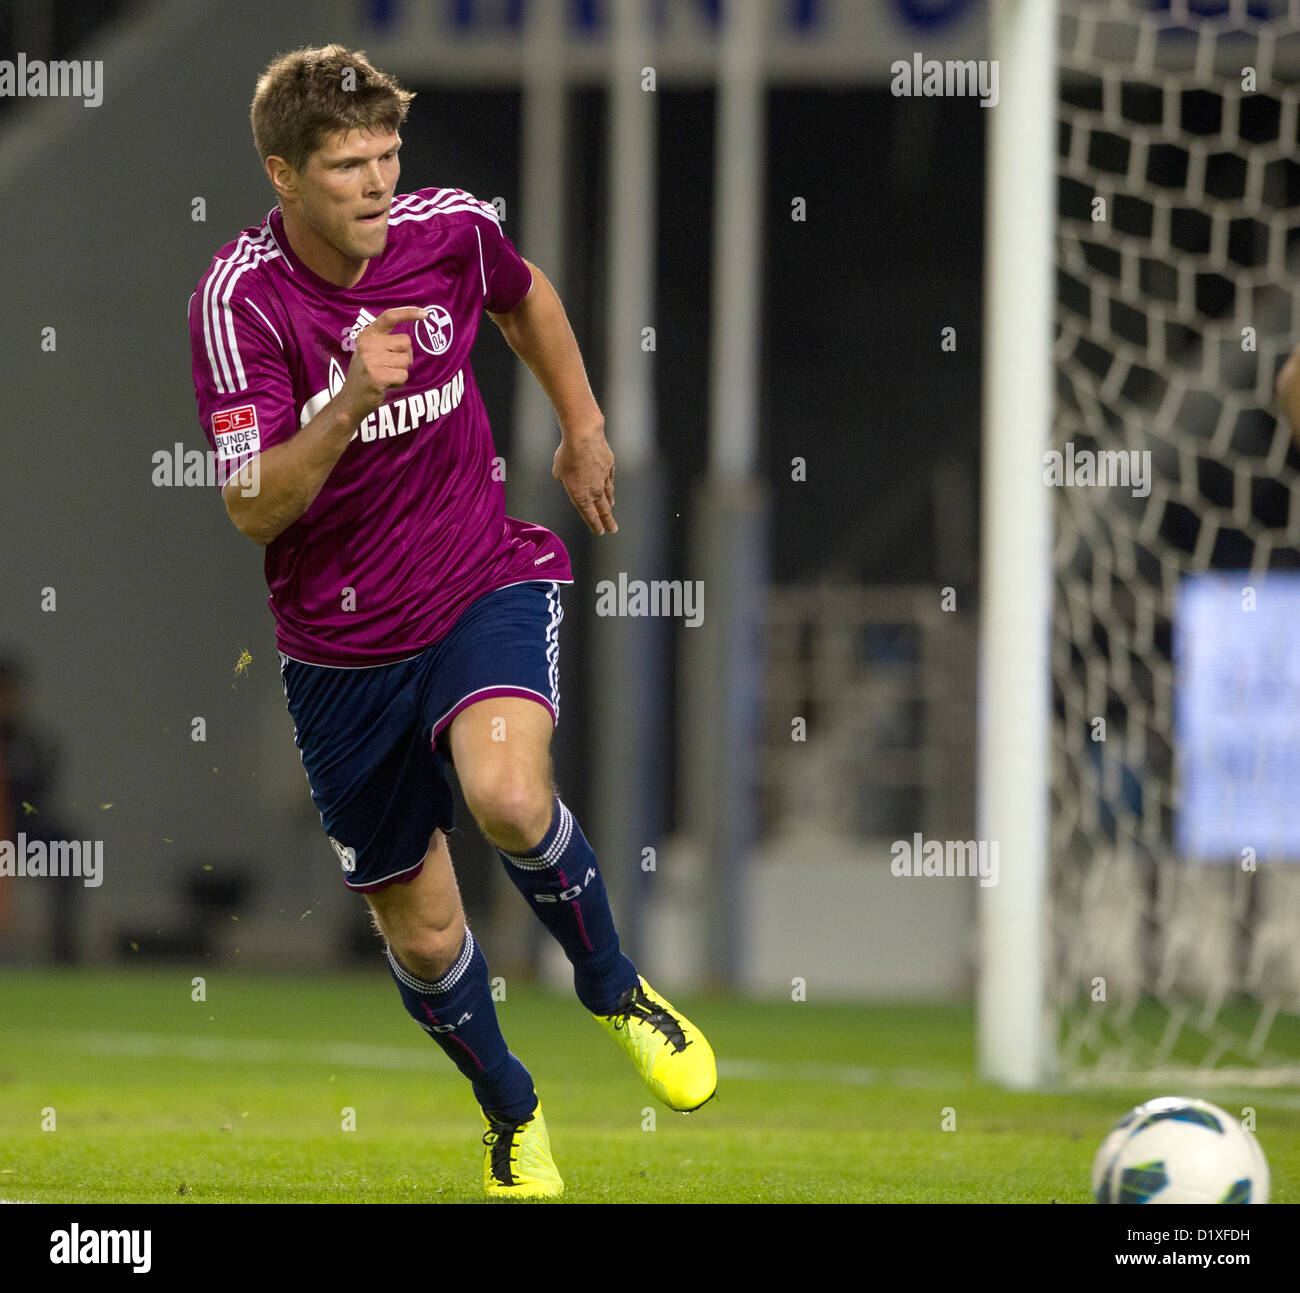 Soccer player Klaas-Jan Huntelaar from FC Schalke 04 performs during a test match in Doha, Qatar on January 06.01.2013. Schalke will stay in the Qatar-winter training camp until January 11.2013. Photo: Peter Kneffel/dpa Stock Photo